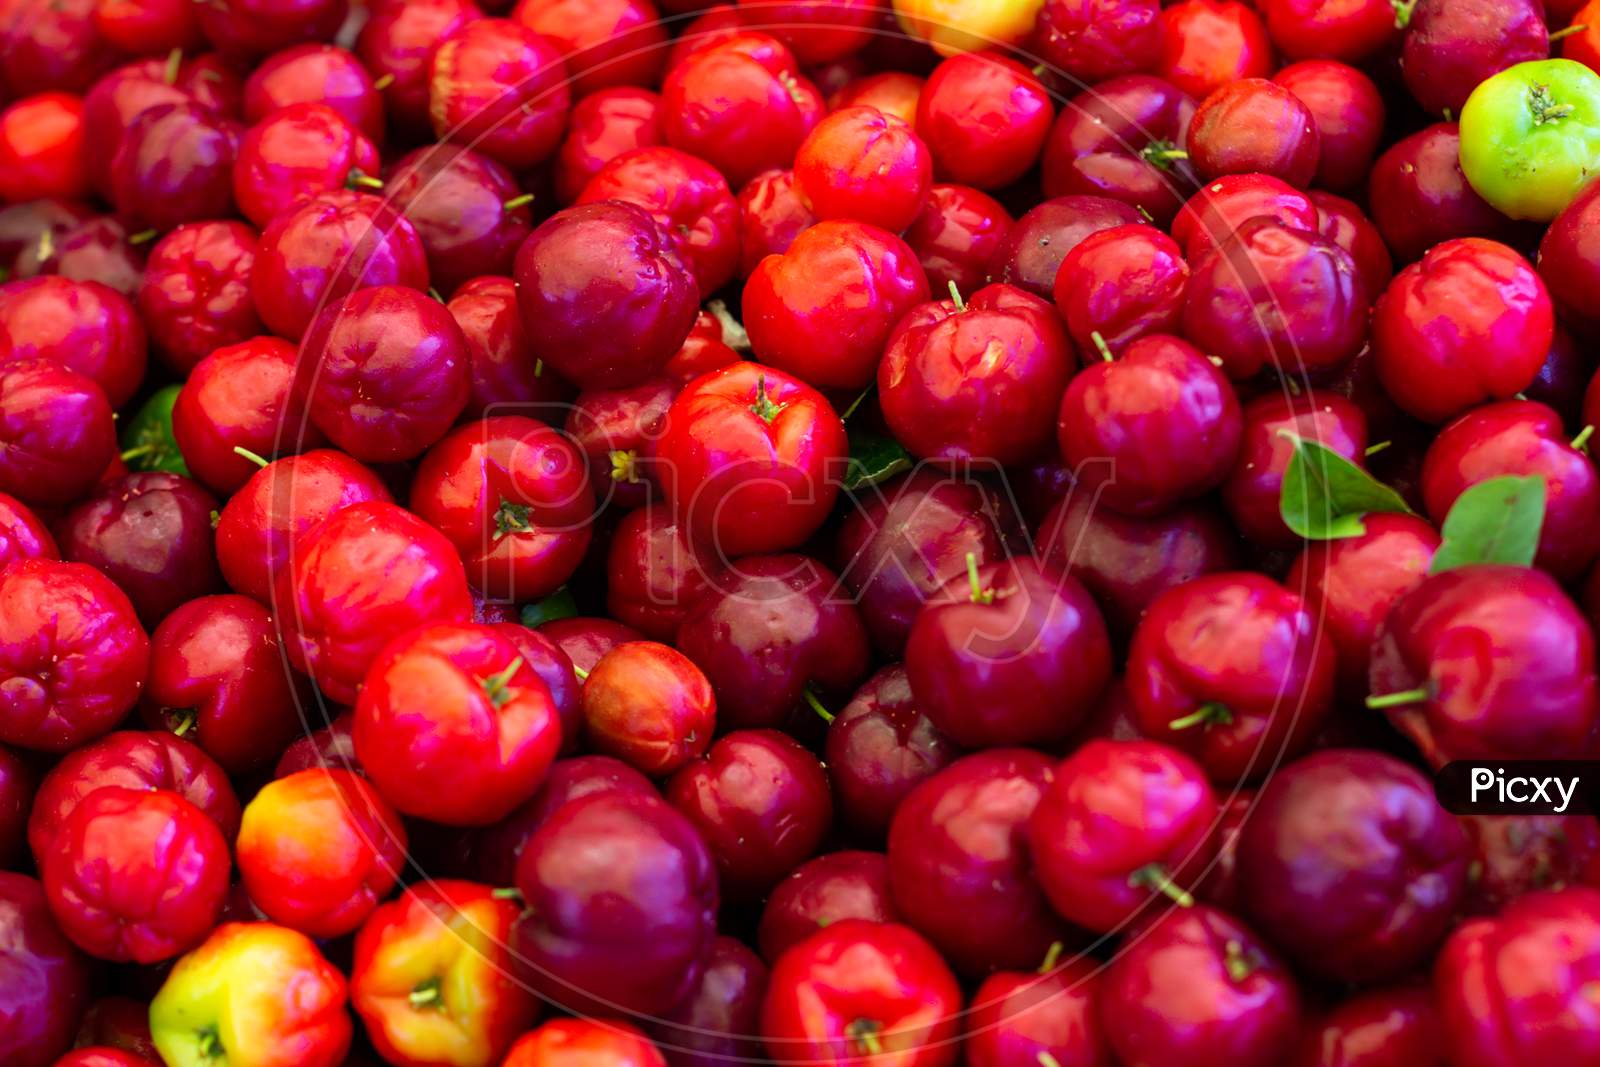 Numerous Cherries In The Market. Fresh Fruits Of The Tropic. Some Colorful Sweet And Sour Fruits.